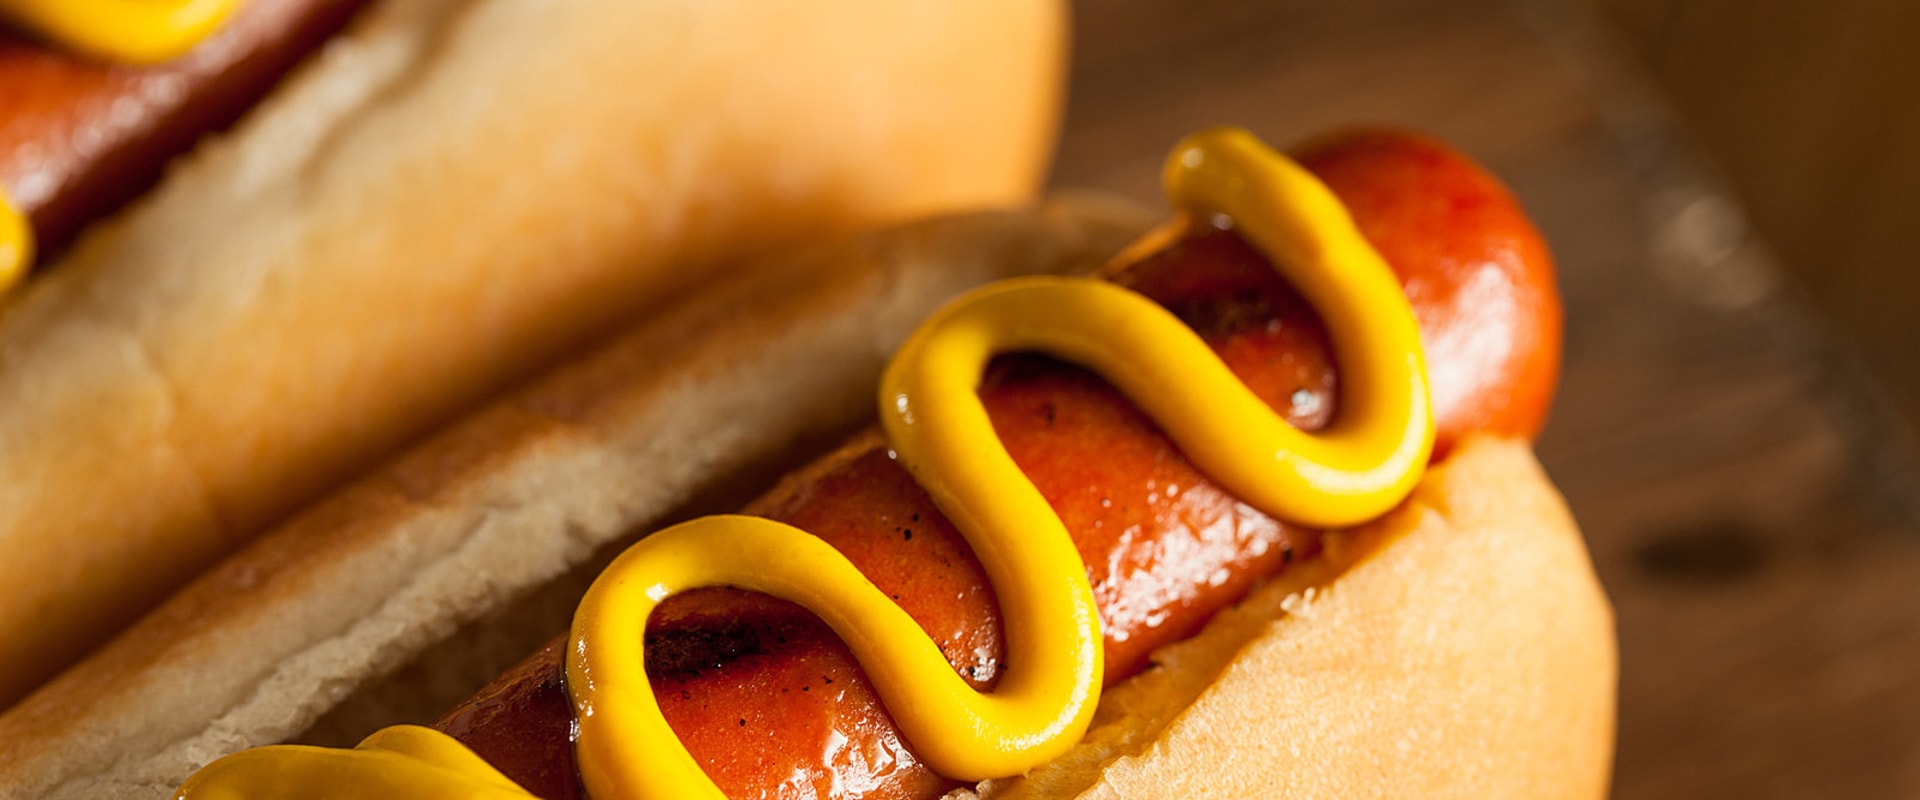 Gluten-Free Hot Dogs: What to Look for at the Hot Dog Stand in Lee County, FL